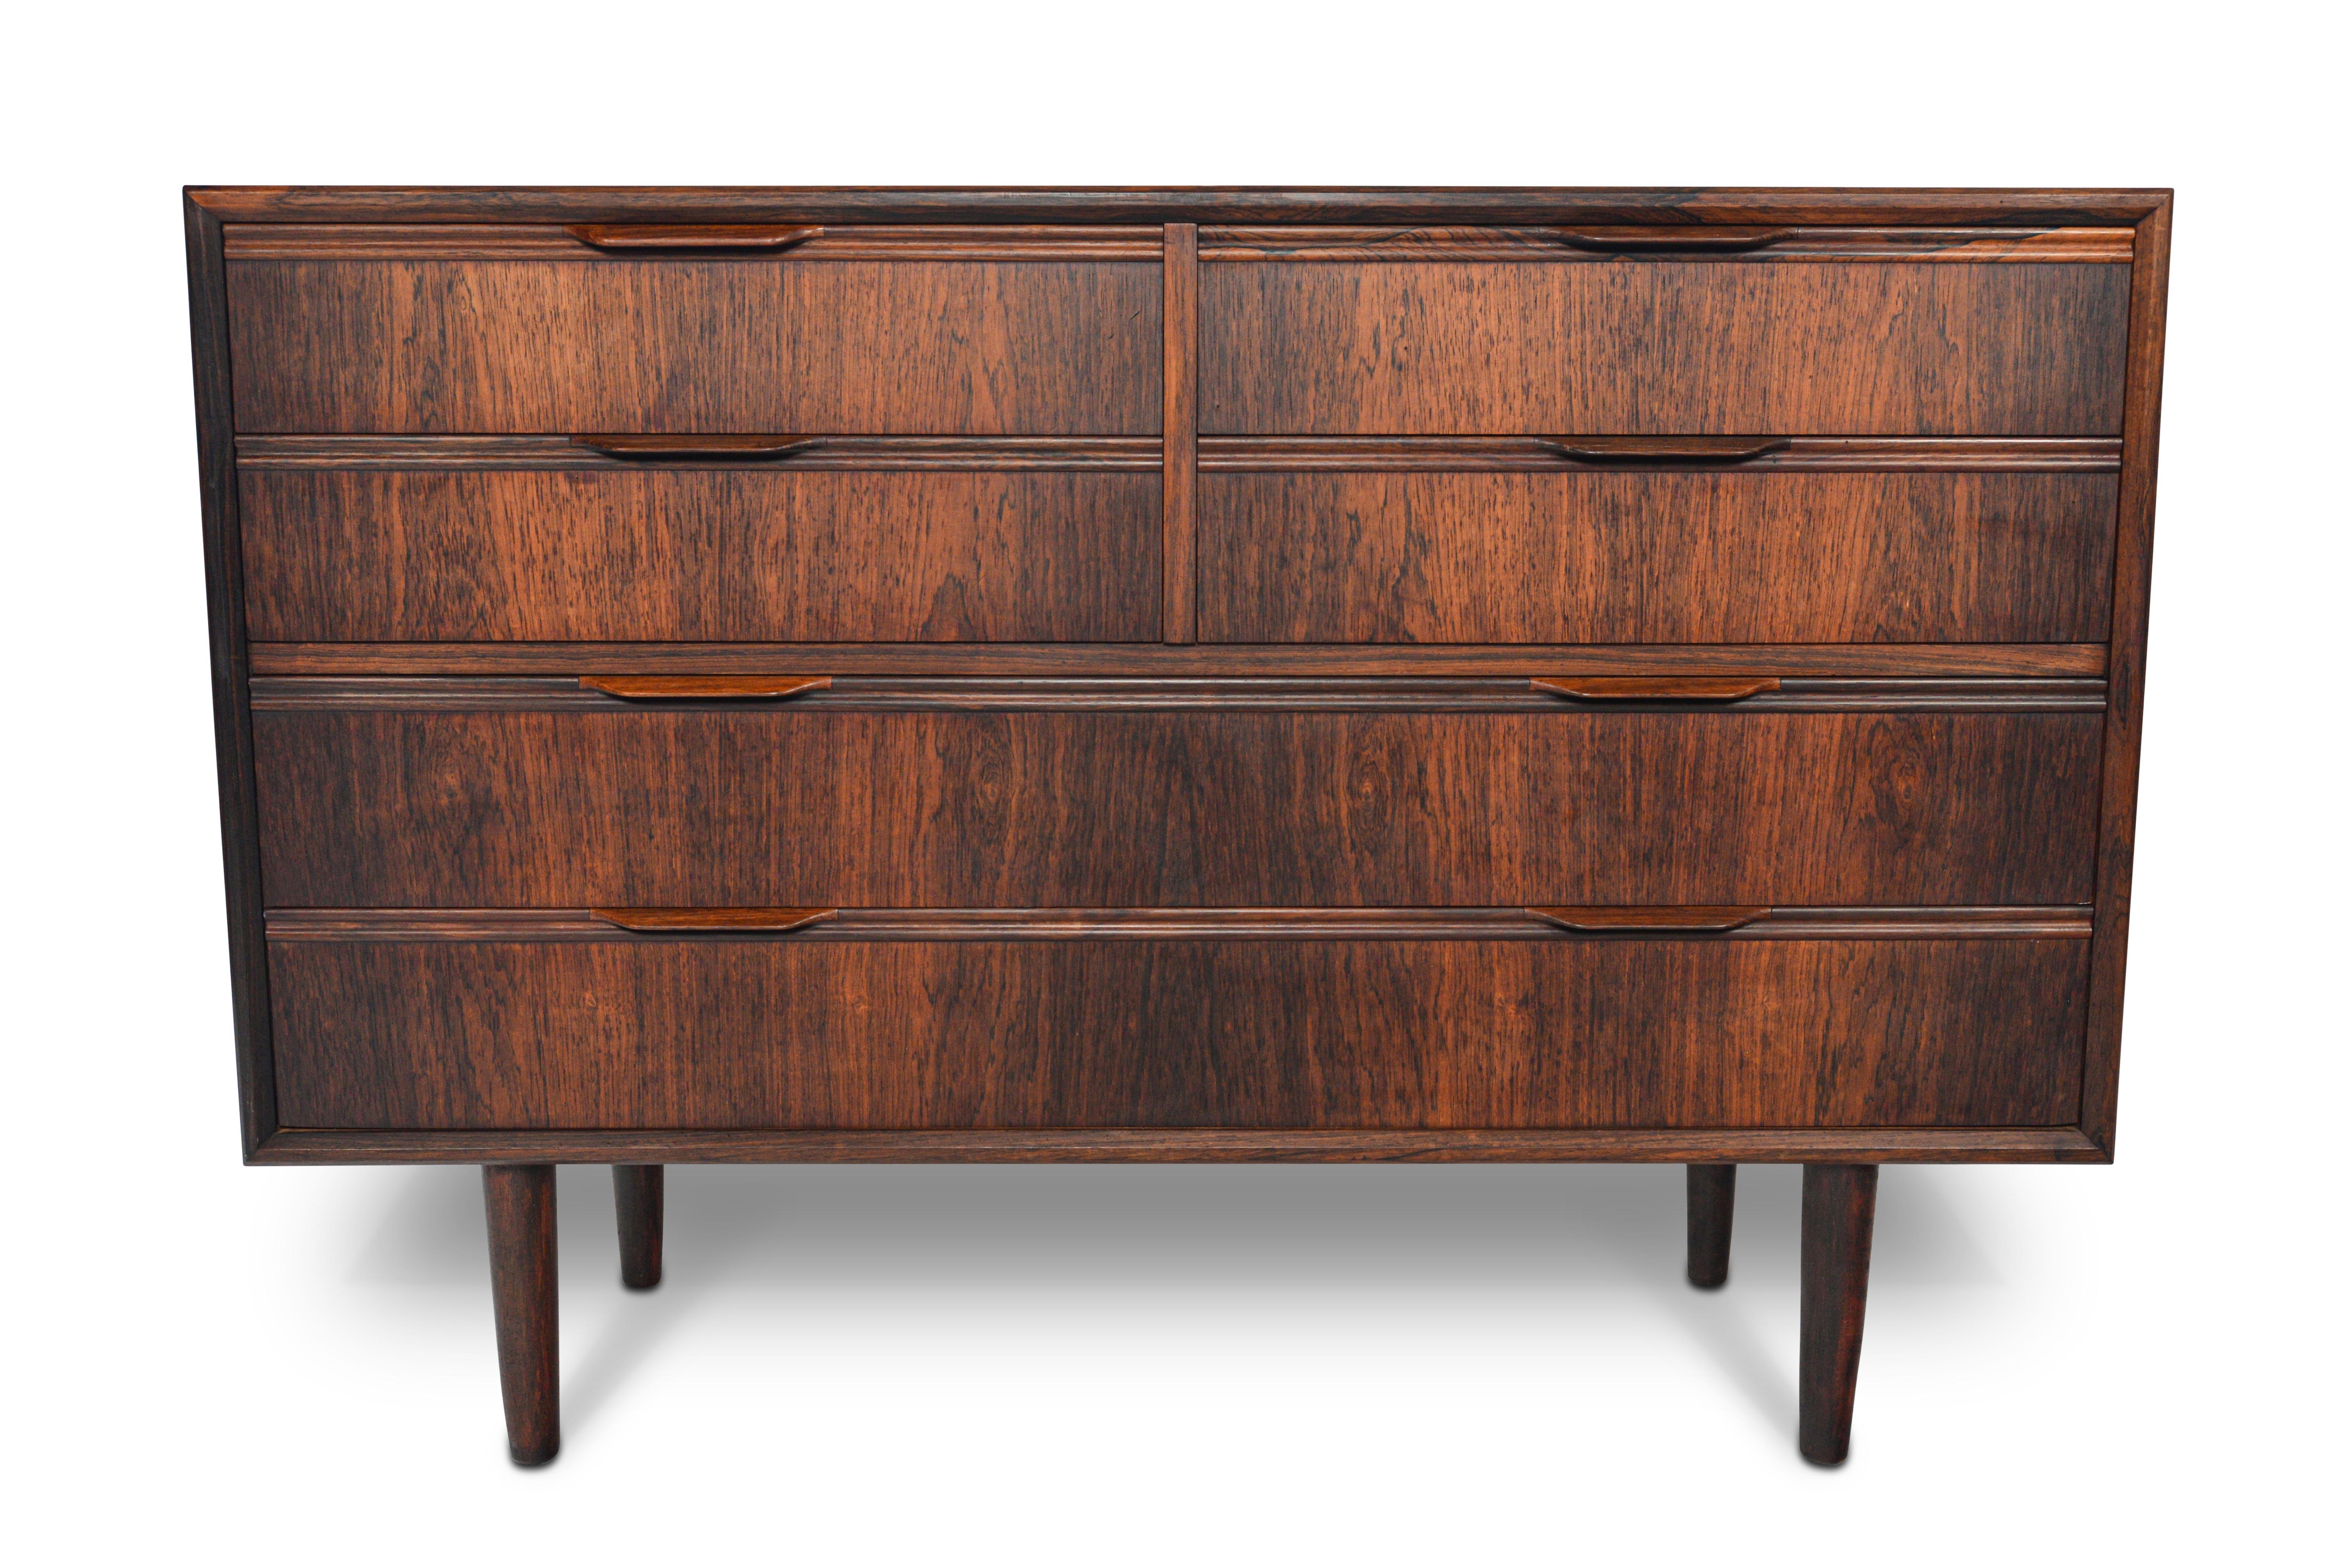 This rare Danish modern low six-drawer dresser by Knud Nielsen offers a wider, lower silhouette for bedroom storage. Crafted in rosewood, the top of this piece features four small drawers and two large lower drawers. In excellent original